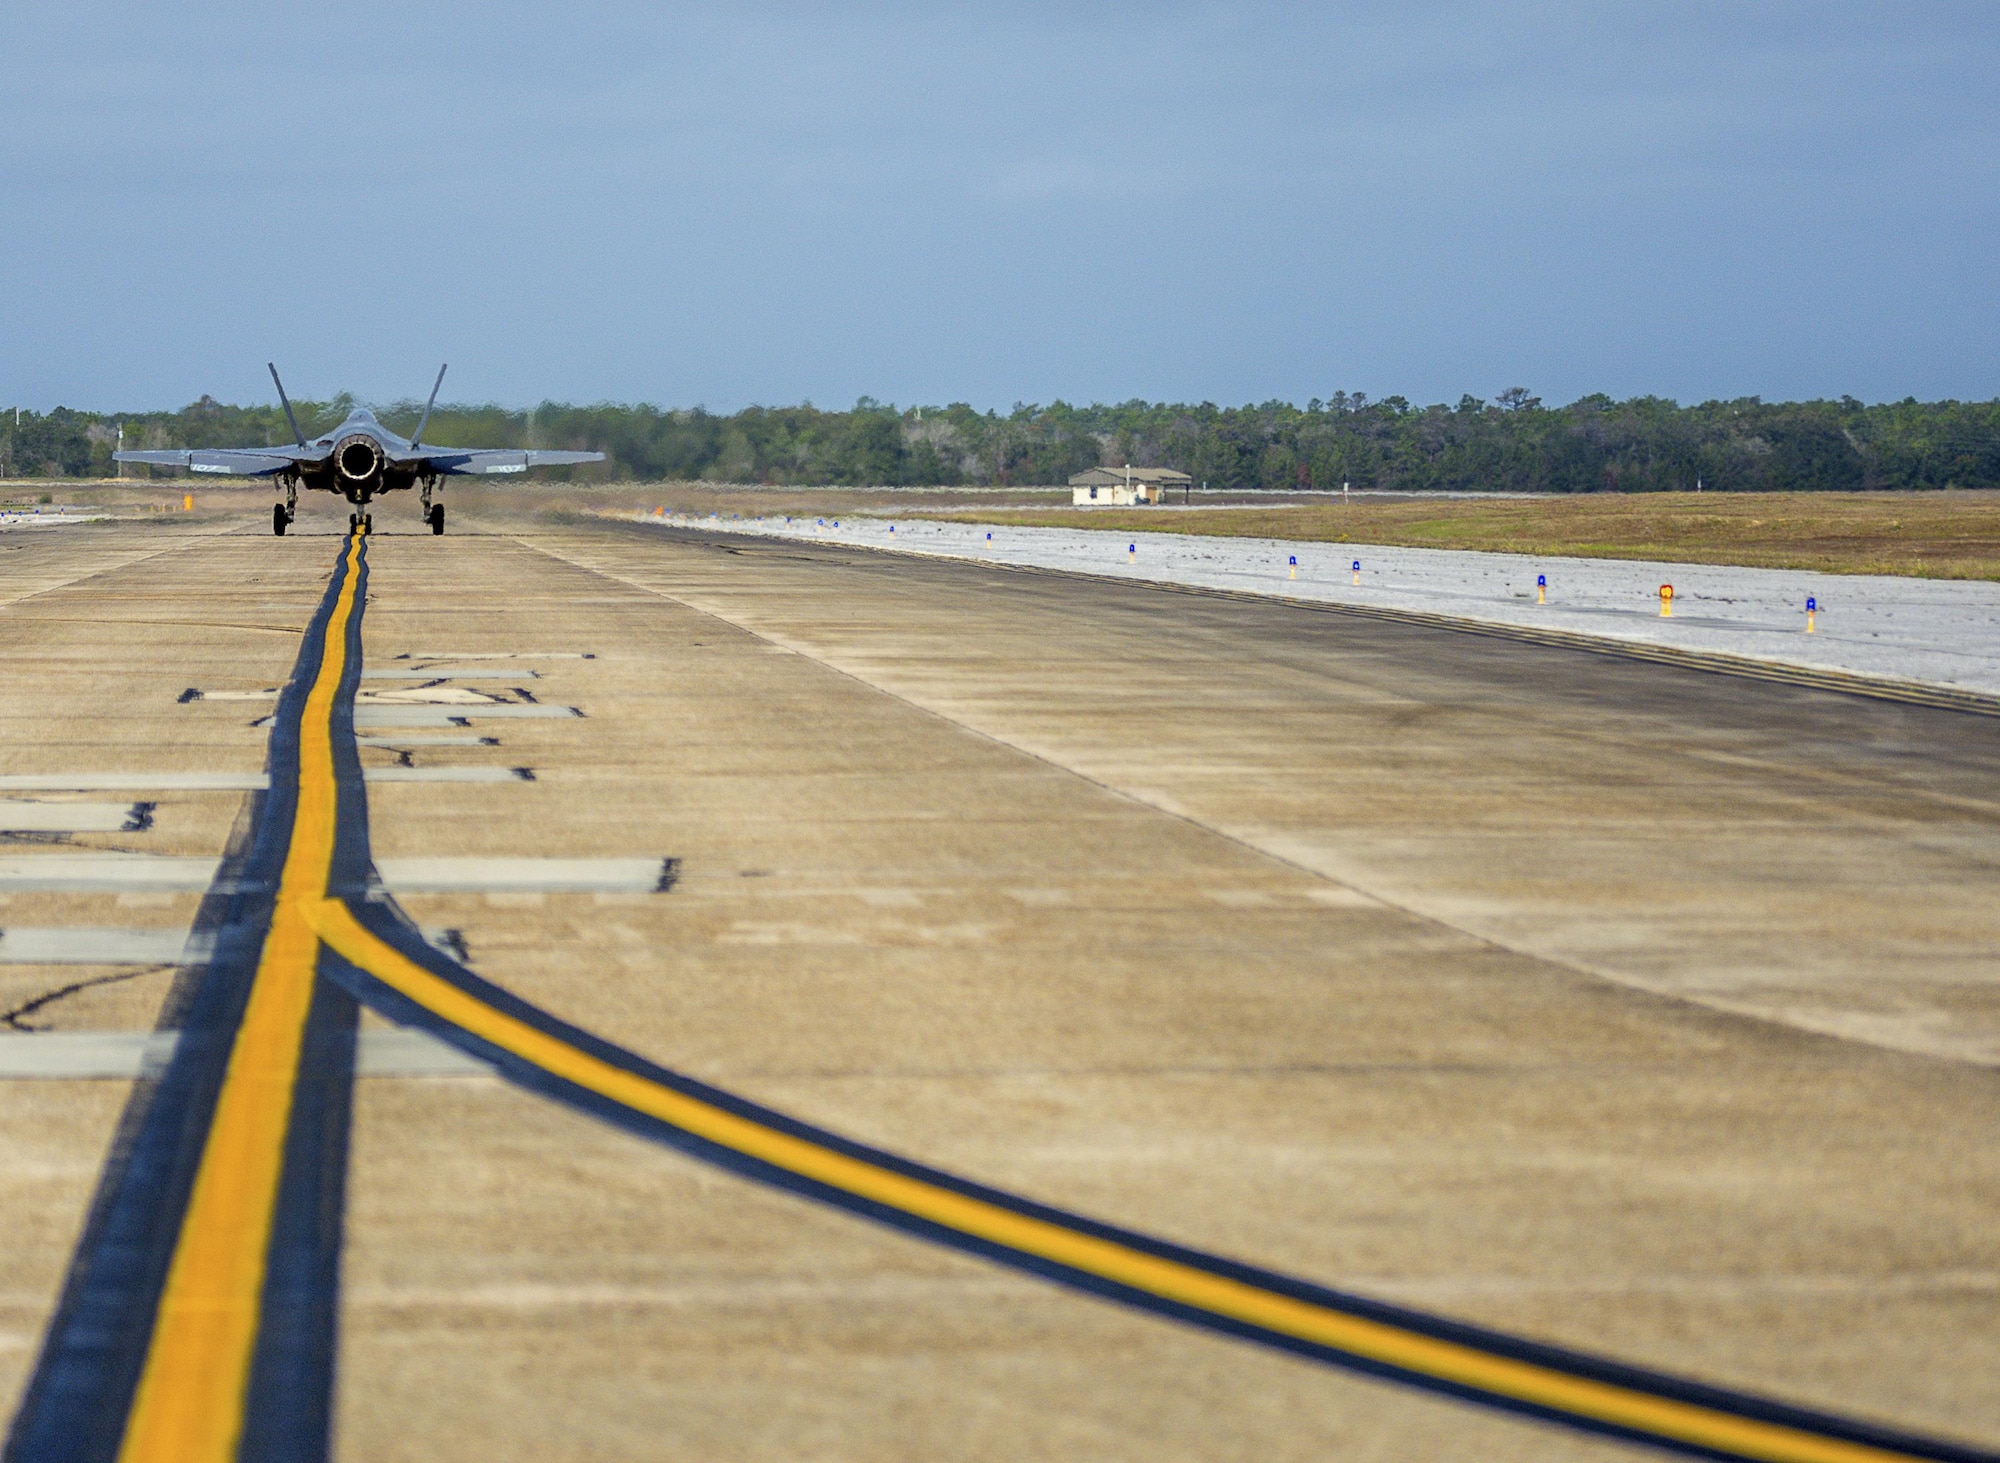 An F-35C Lightning II taxis down the flight line Feb. 27 from the Strike Fighter Squadron 101 at Eglin Air Force Base, Fla. The F-35C variant is a carrier-capable low-observable multi-role fighter aircraft, designed to provide unmatched airborne power projection from the sea. The Navy's joint strike fighter bears structural modifications from other variants, necessitated by the increased resiliency required for carrier operations. (U.S. Air Force photo/Kristin Stewart)